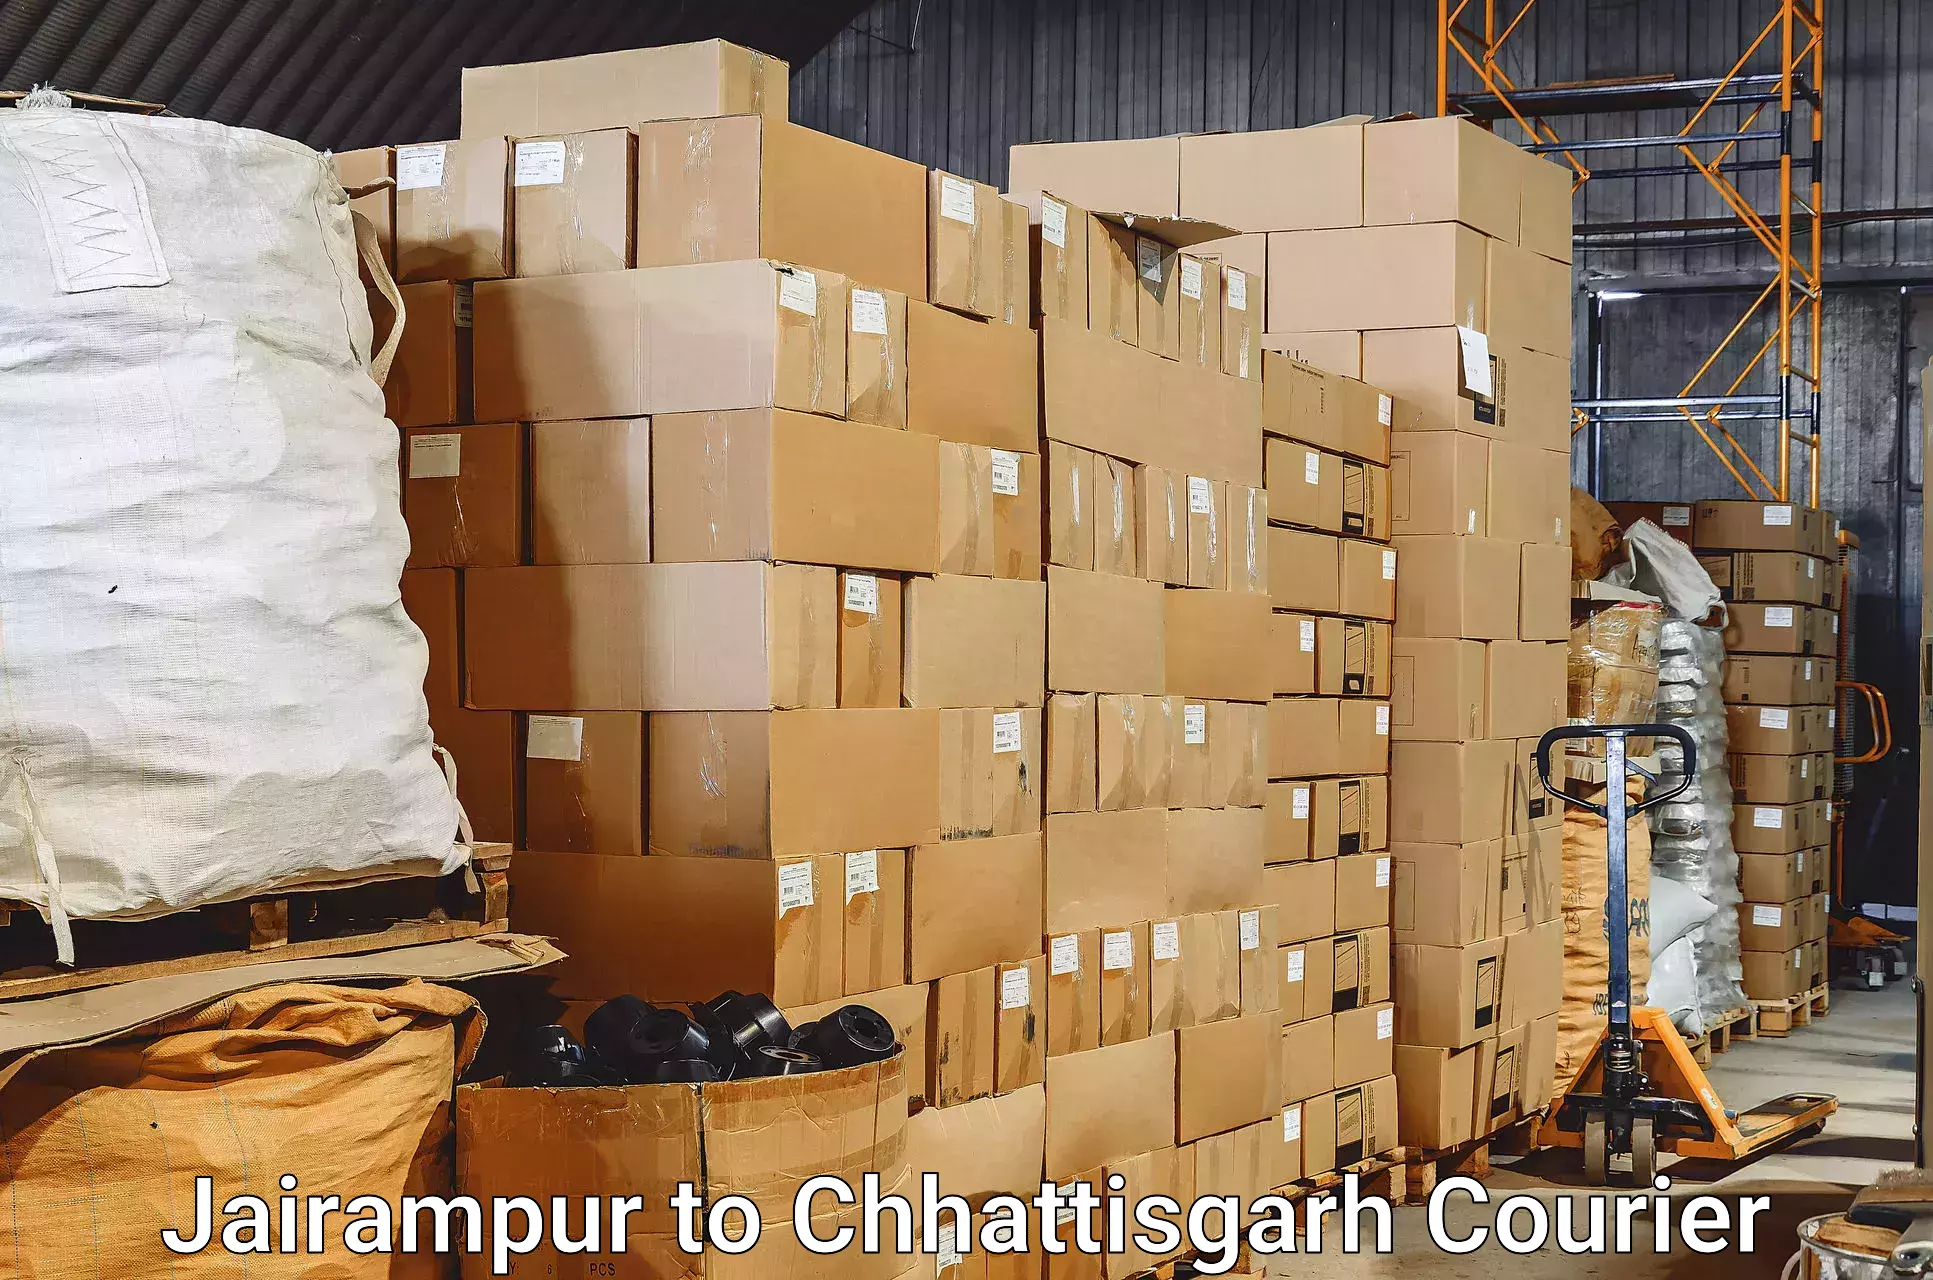 Baggage delivery planning Jairampur to Raigarh